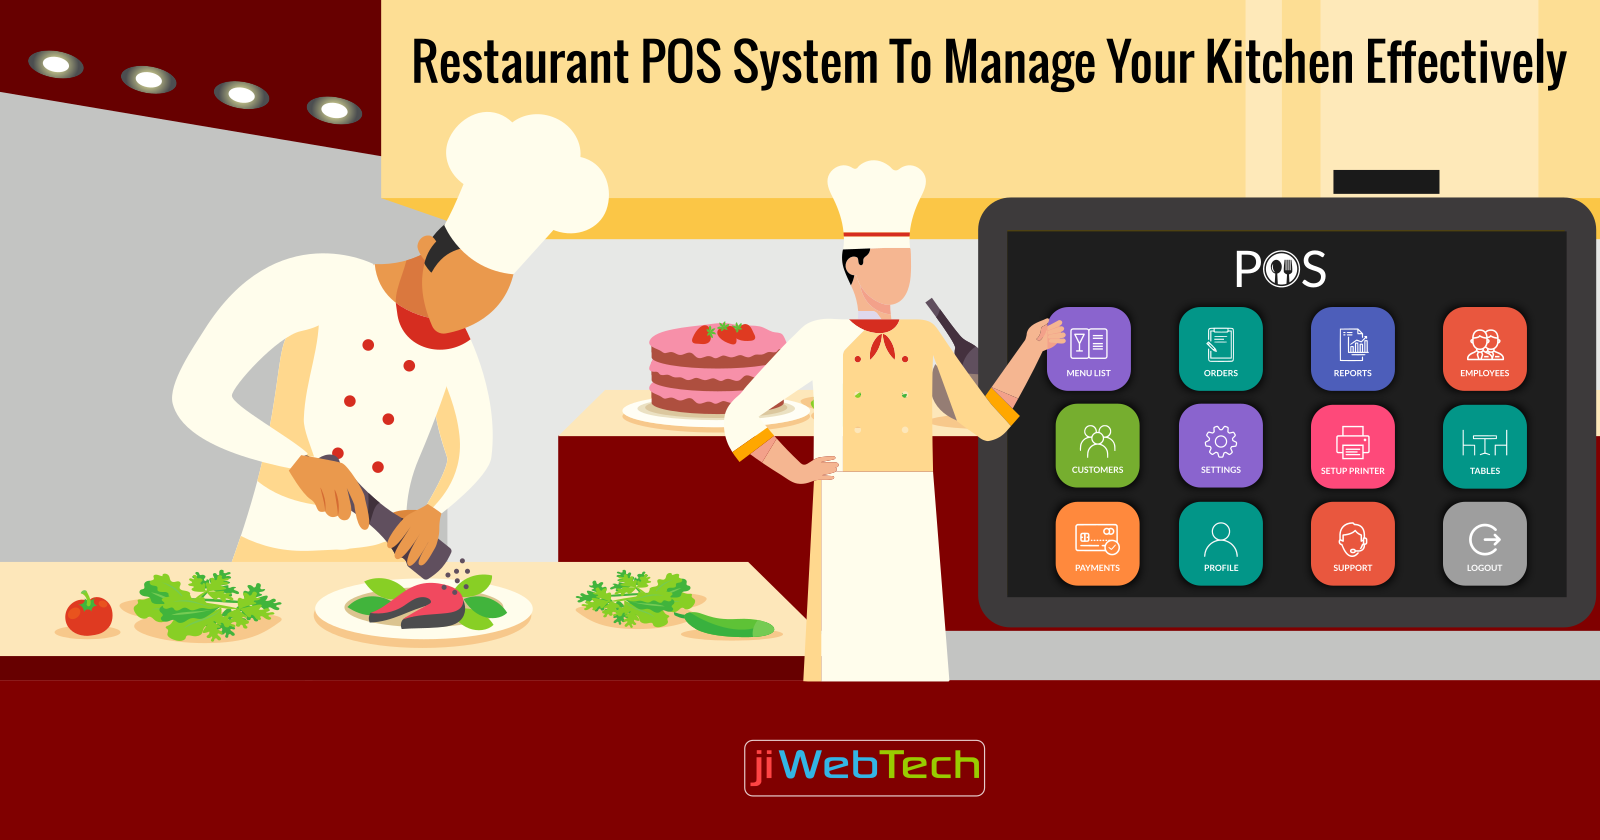 How Does A Restaurant POS Software Help In Kitchen Management?